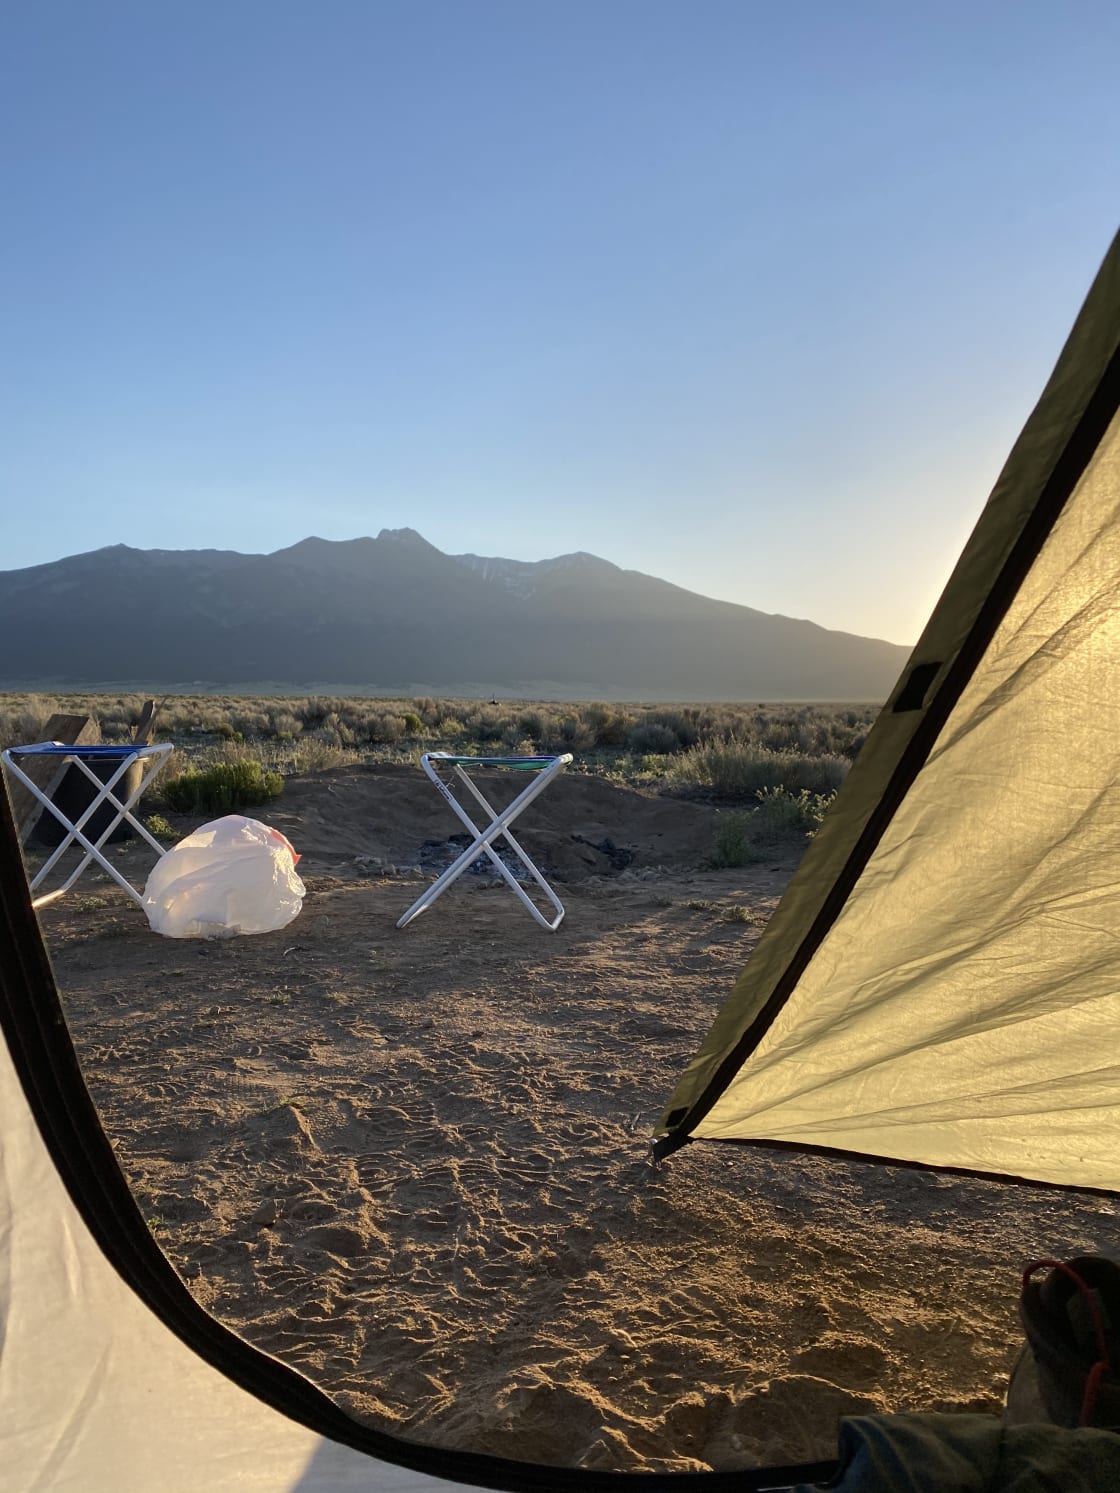 Views from the tent in the morning